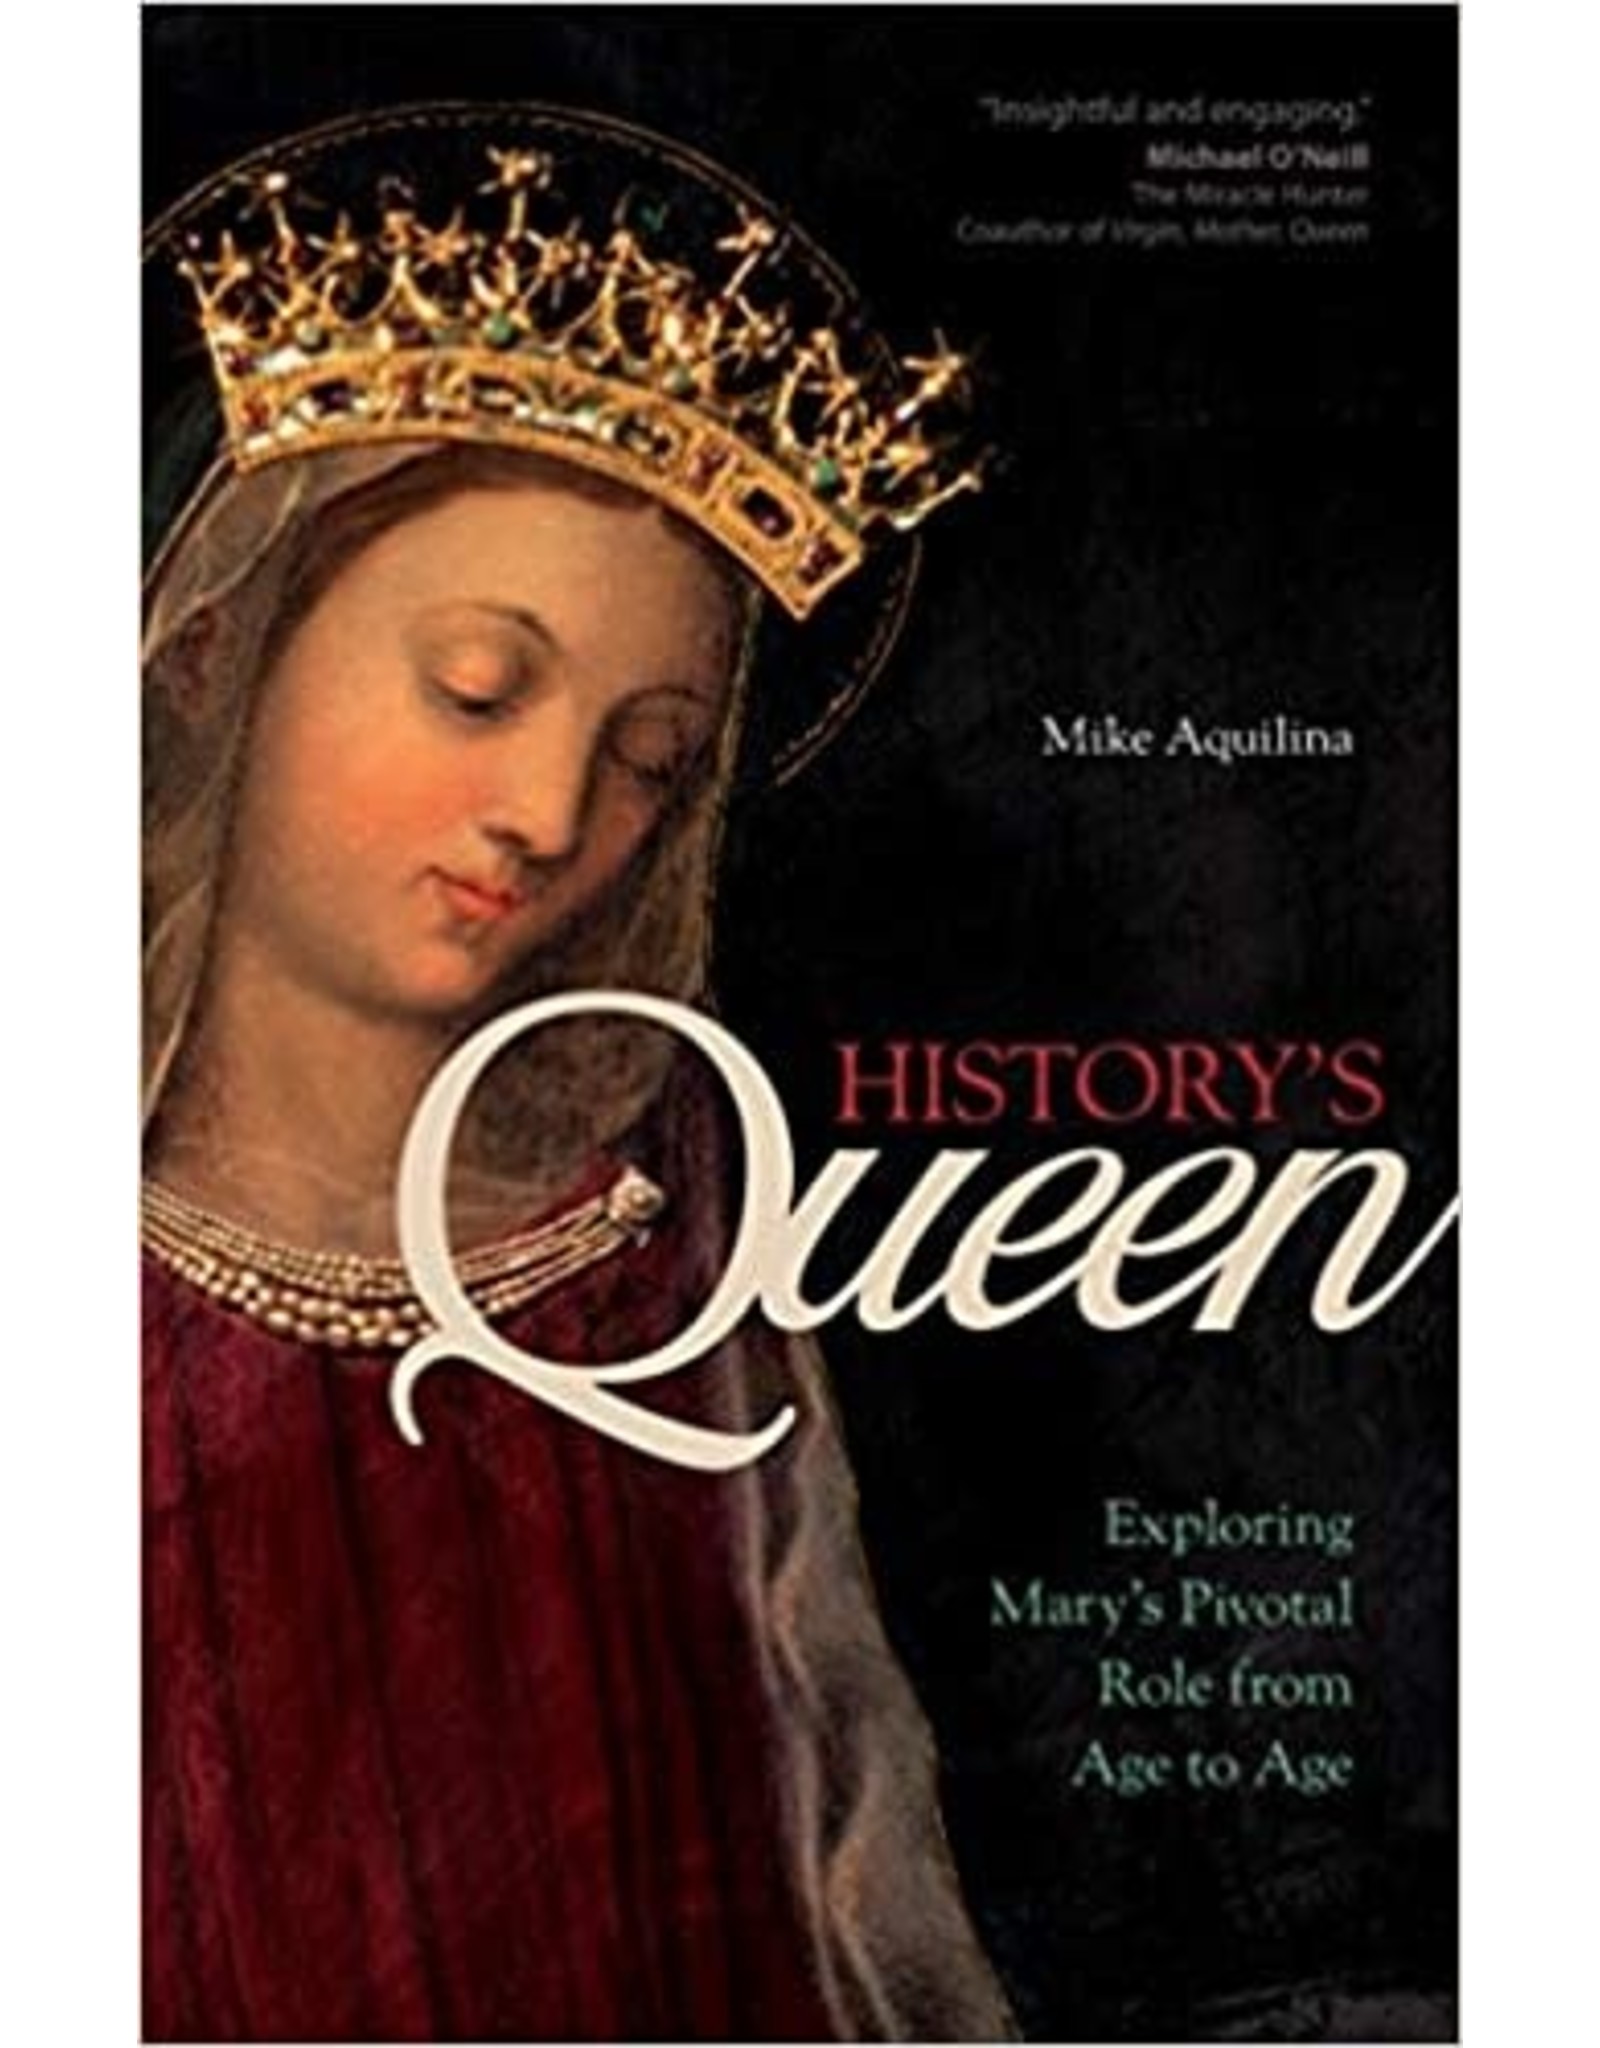 Ave Maria History's Queen: Exploring Mary's Pivotal Role from Age to Age